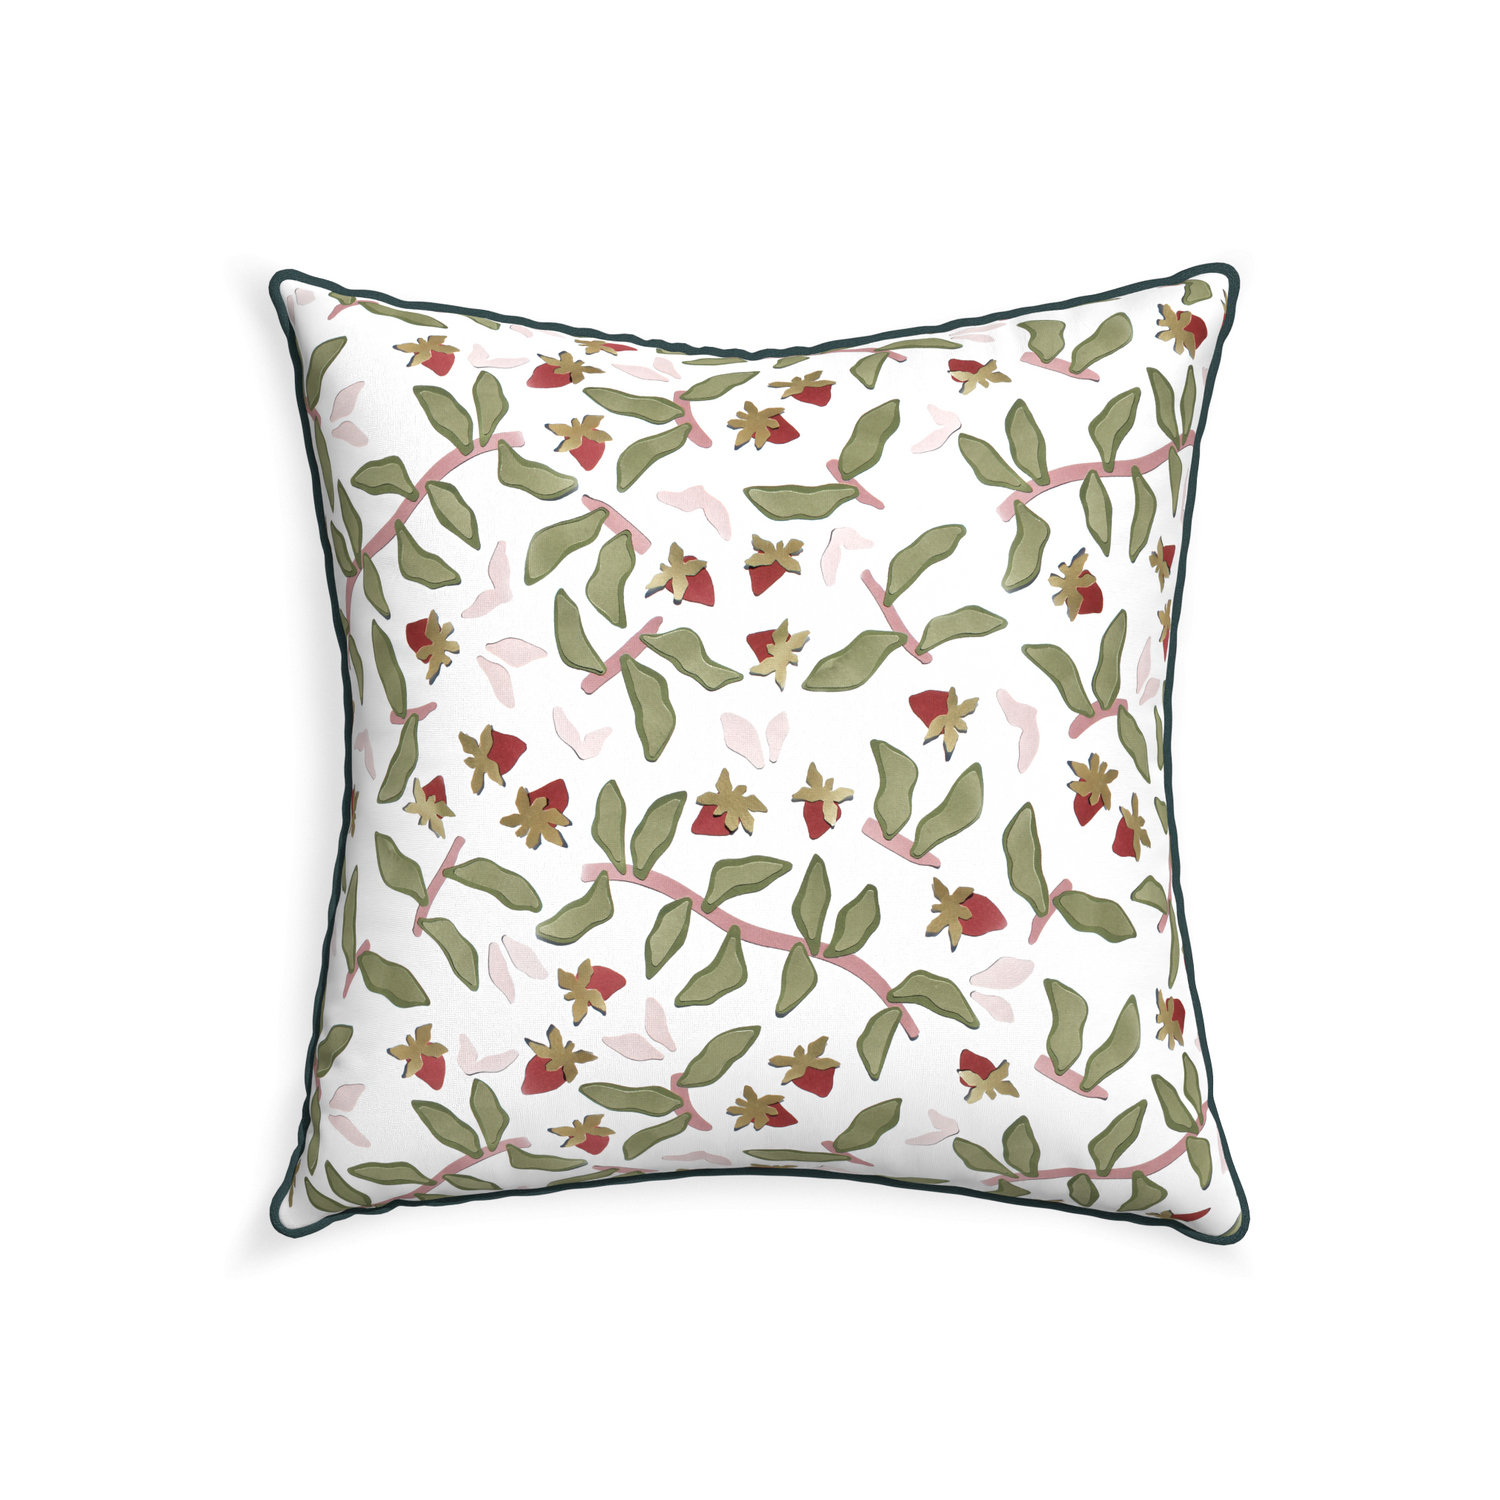 22-square nellie custom strawberry & botanicalpillow with p piping on white background